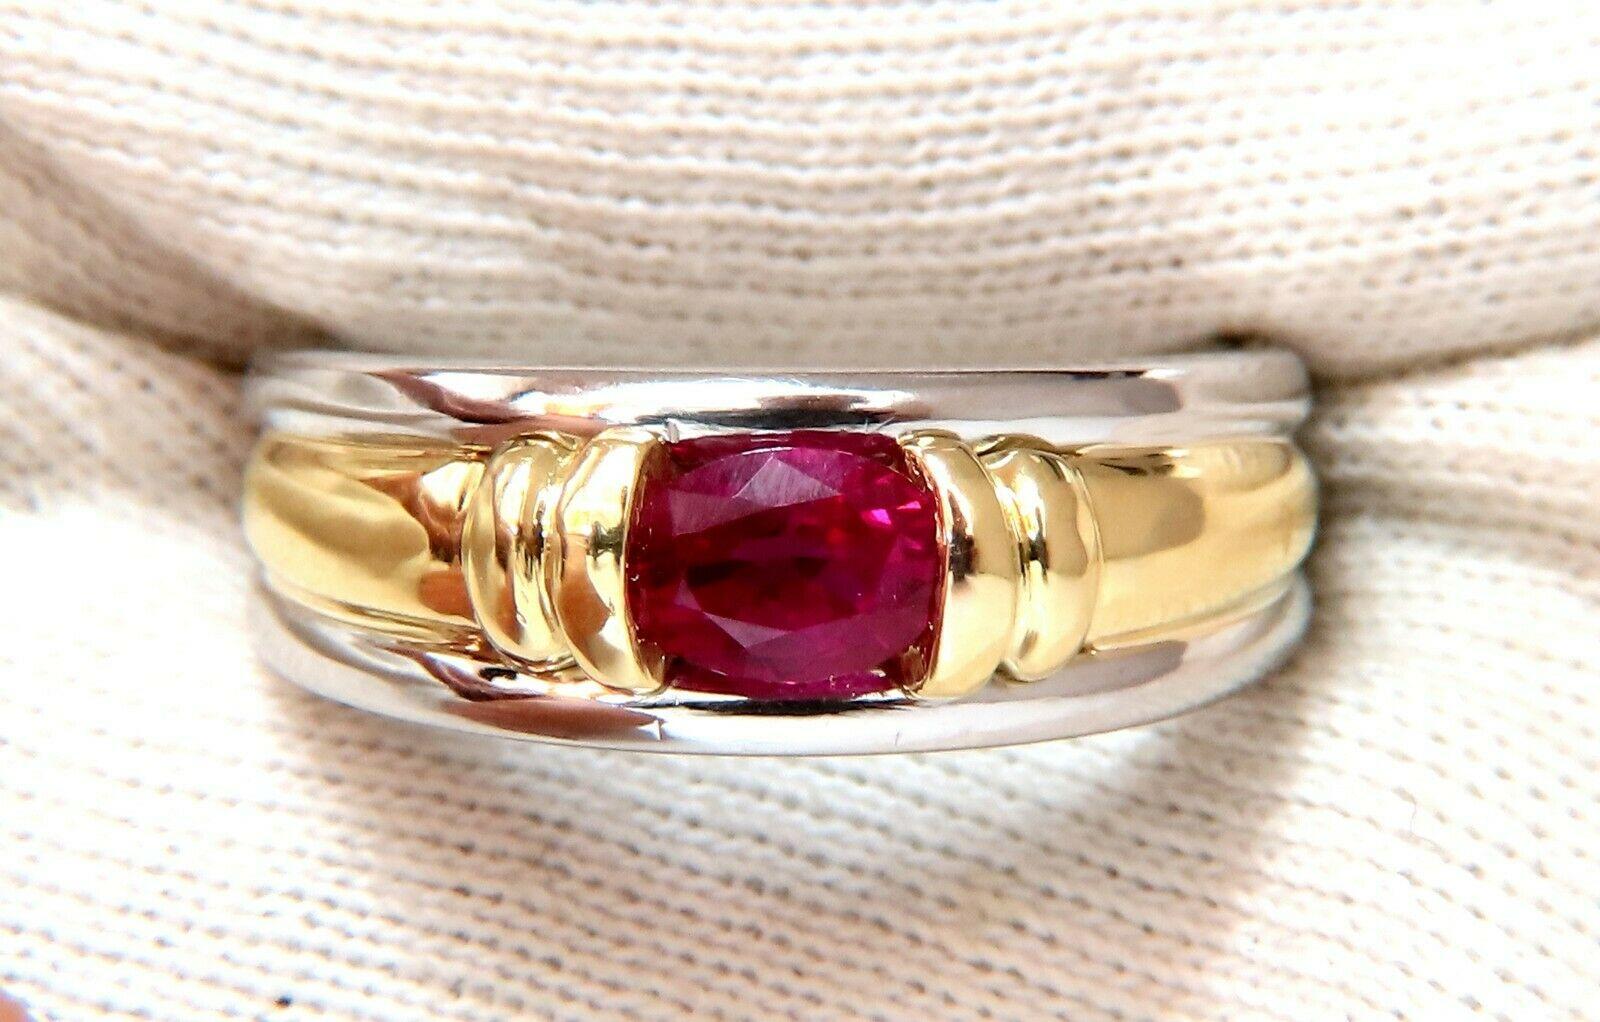 Men's Ruby Ring.
Ruby Classic Excellence
GIA Certified: 1.19ct Natural Burma Ruby
Oval Full cut brilliant
7.12 x 5.07 x 3.77mm
Mounted in Channel, For Safe & Durable Wear.
Clean Clarity, Transparent & Even Toned.
Platinum &  18kt. yellow gold
19.7